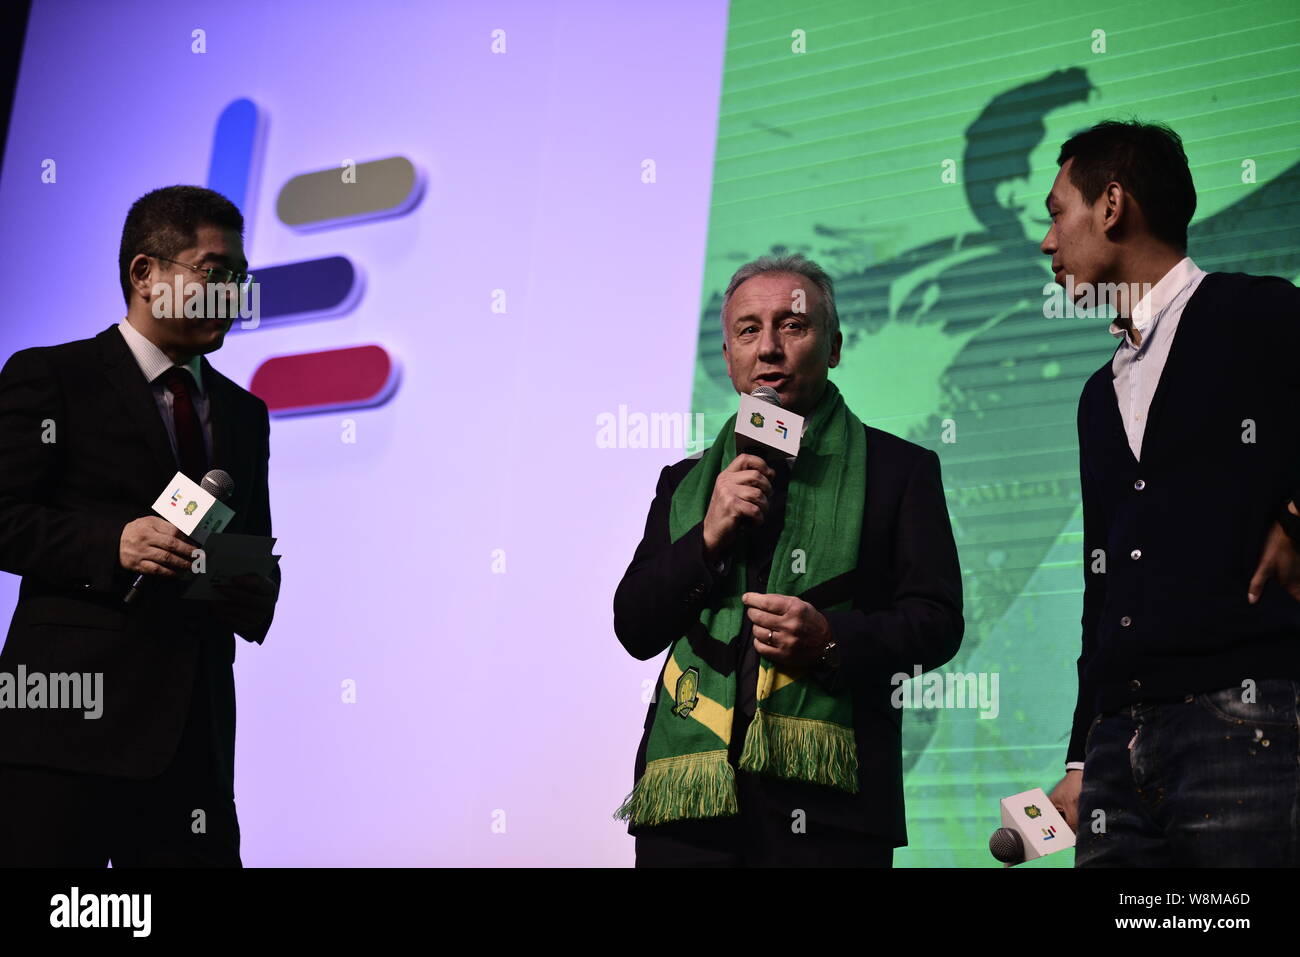 Head coach Alberto Zaccheroni, center, of Beijing Guoan F.C. attends a press conference to announce the strategic partnership between LeTV and Beijing Stock Photo